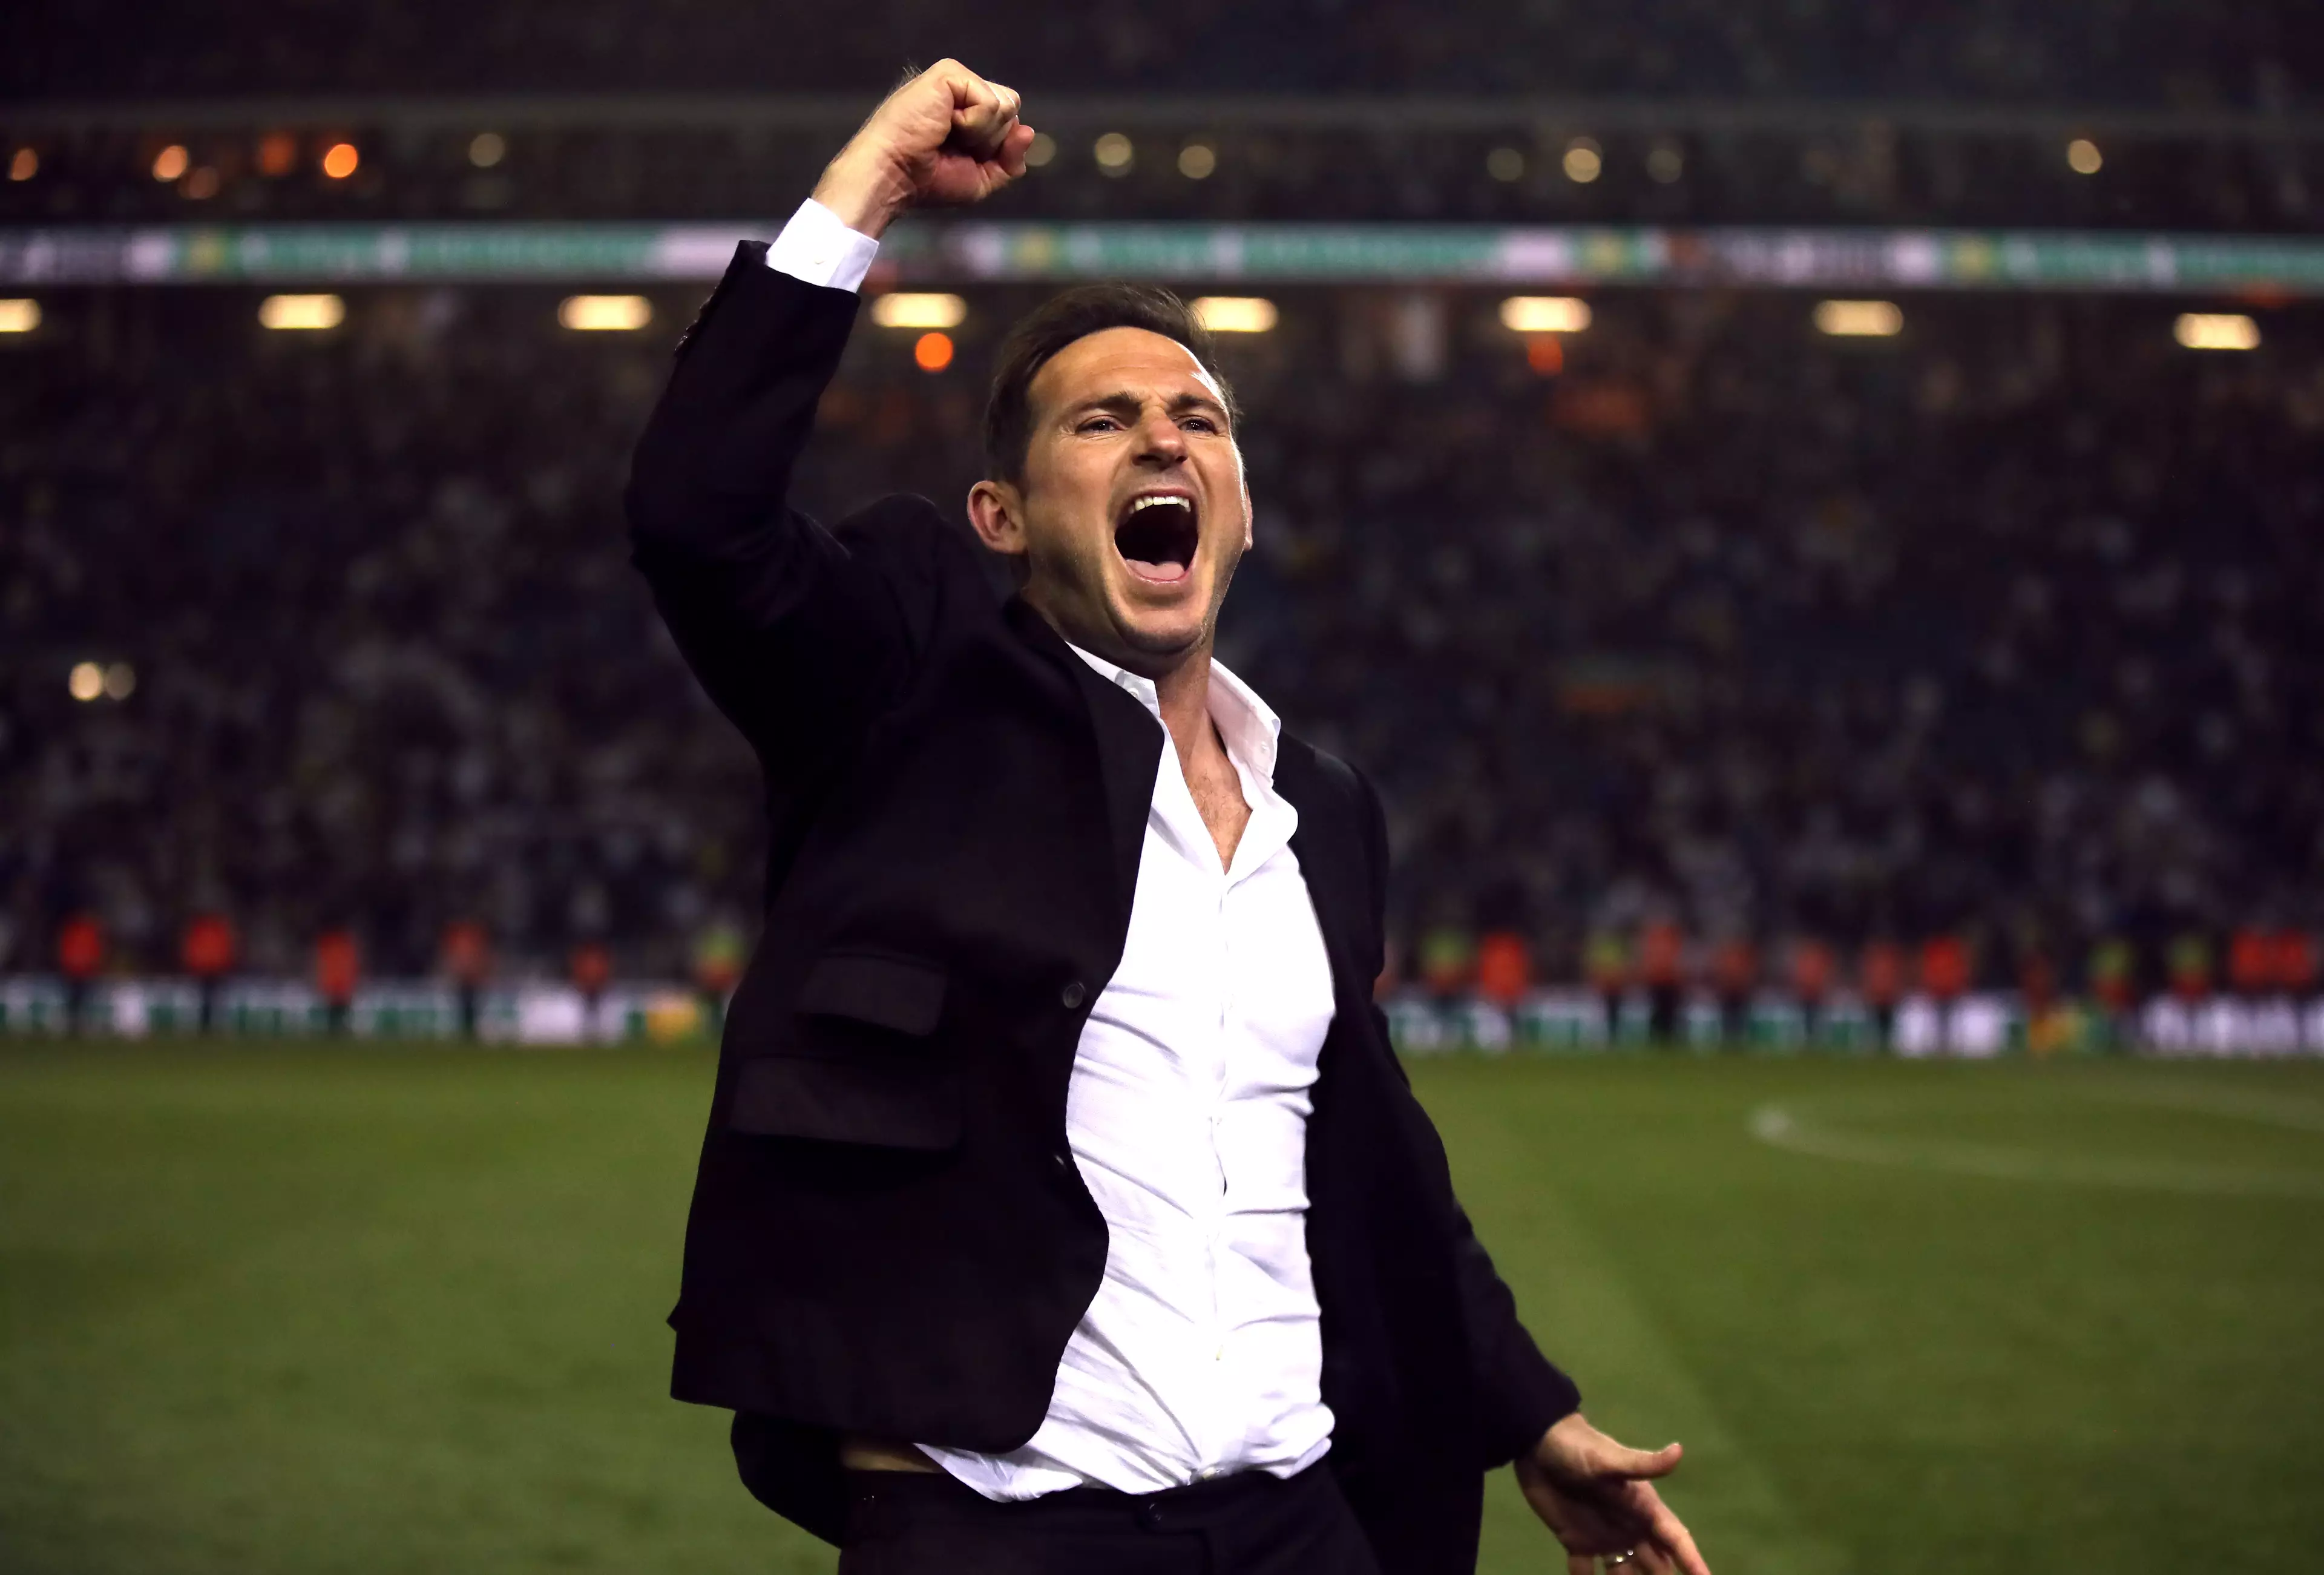 Frank Lampard left Derby after one season to take over as Chelsea manager